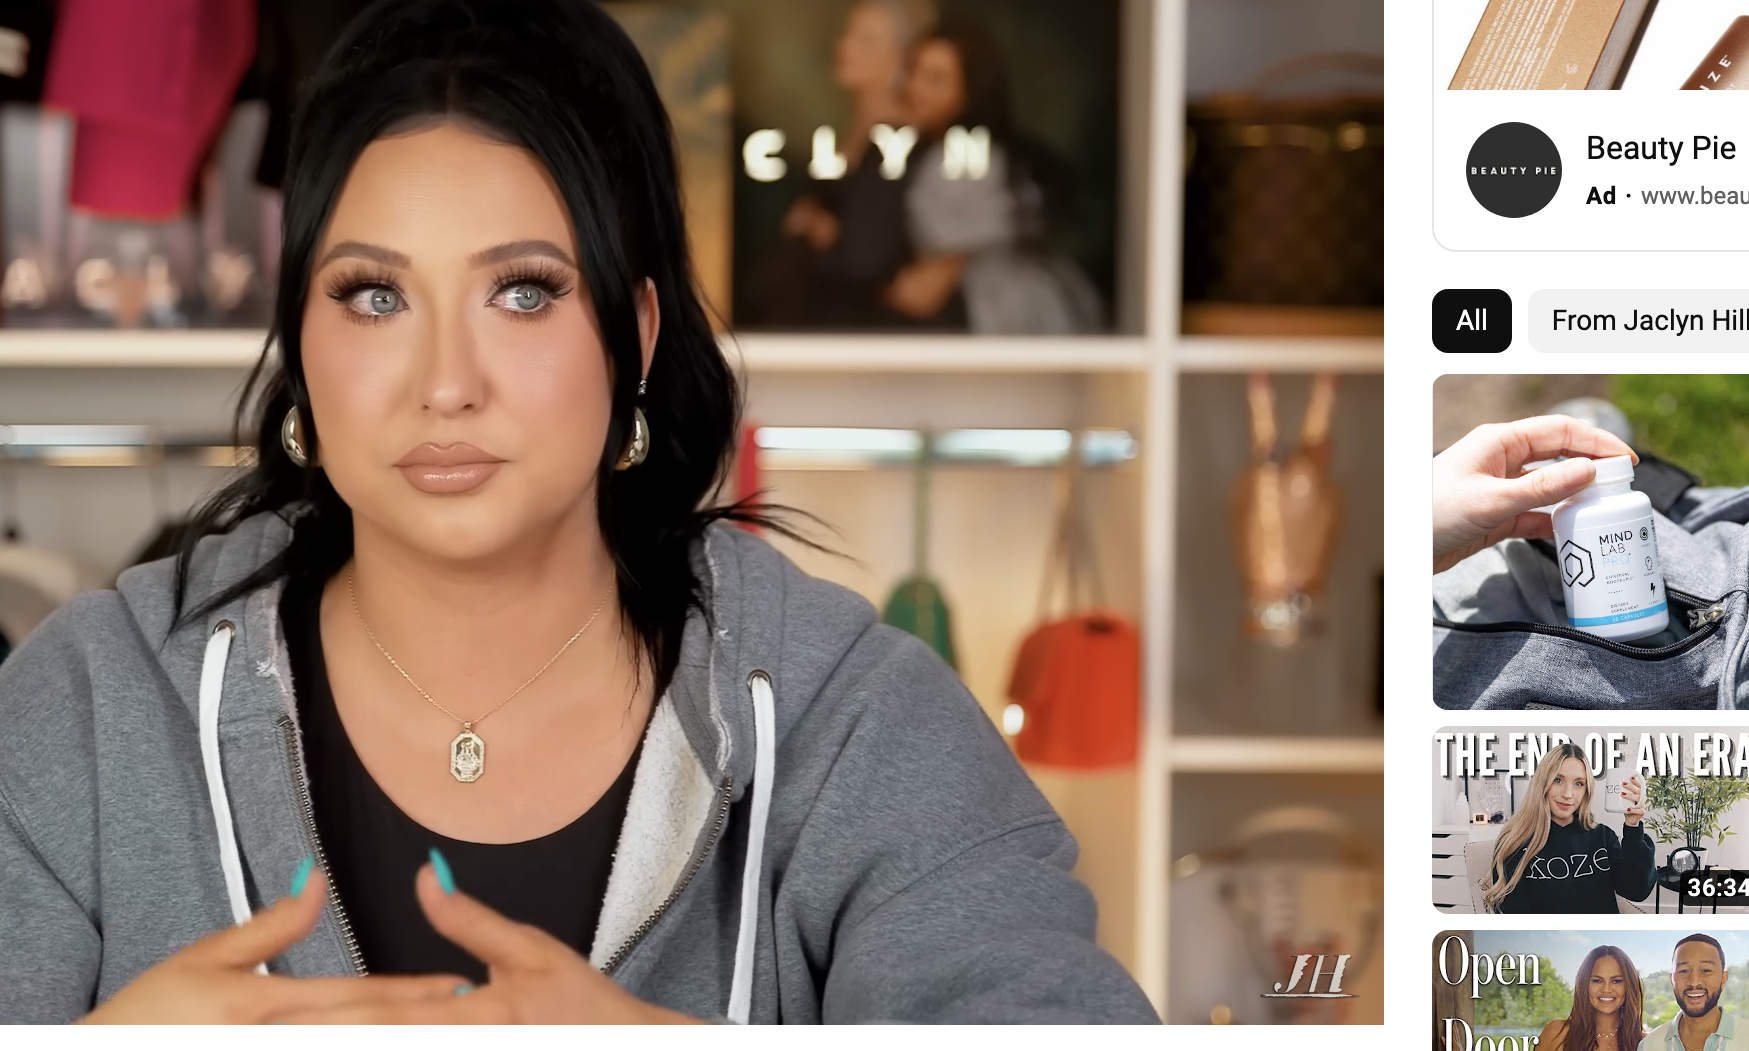 Beauty Influencer Jaclyn Hill Cosmetics Defective Lipsticks Have